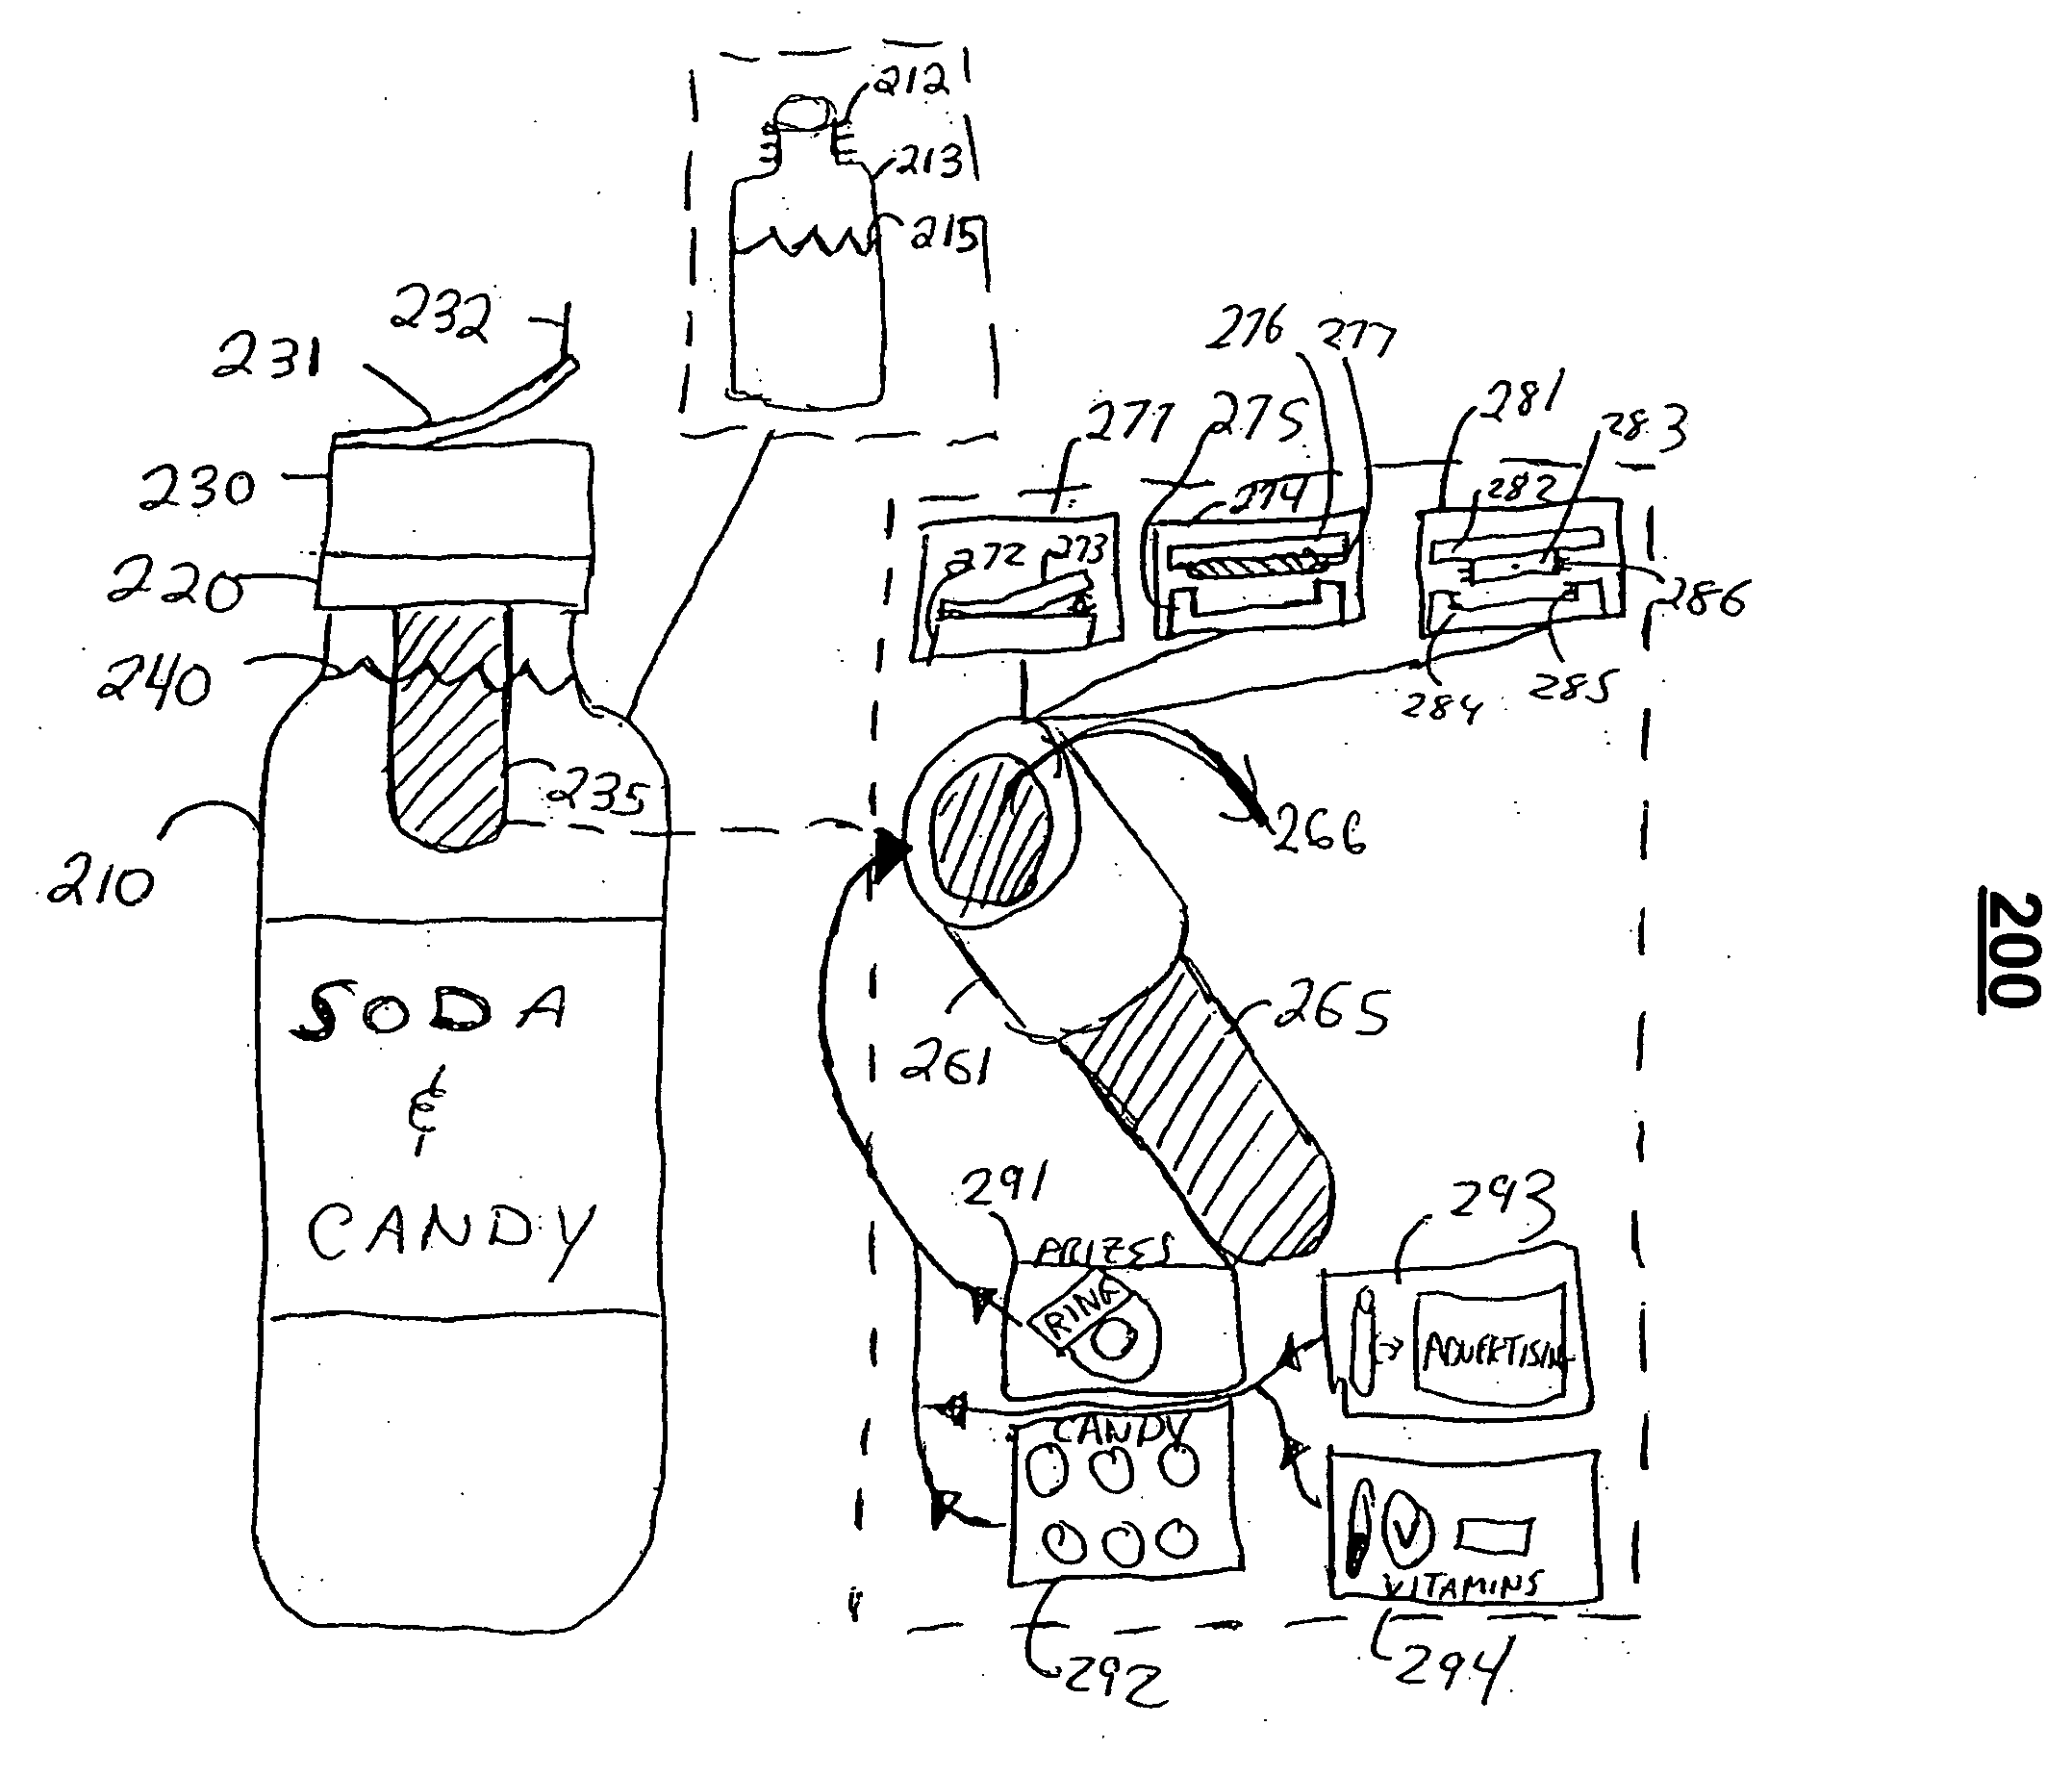 Bottles, cans, and other storage structures with secondary storage compartments such as cap containers